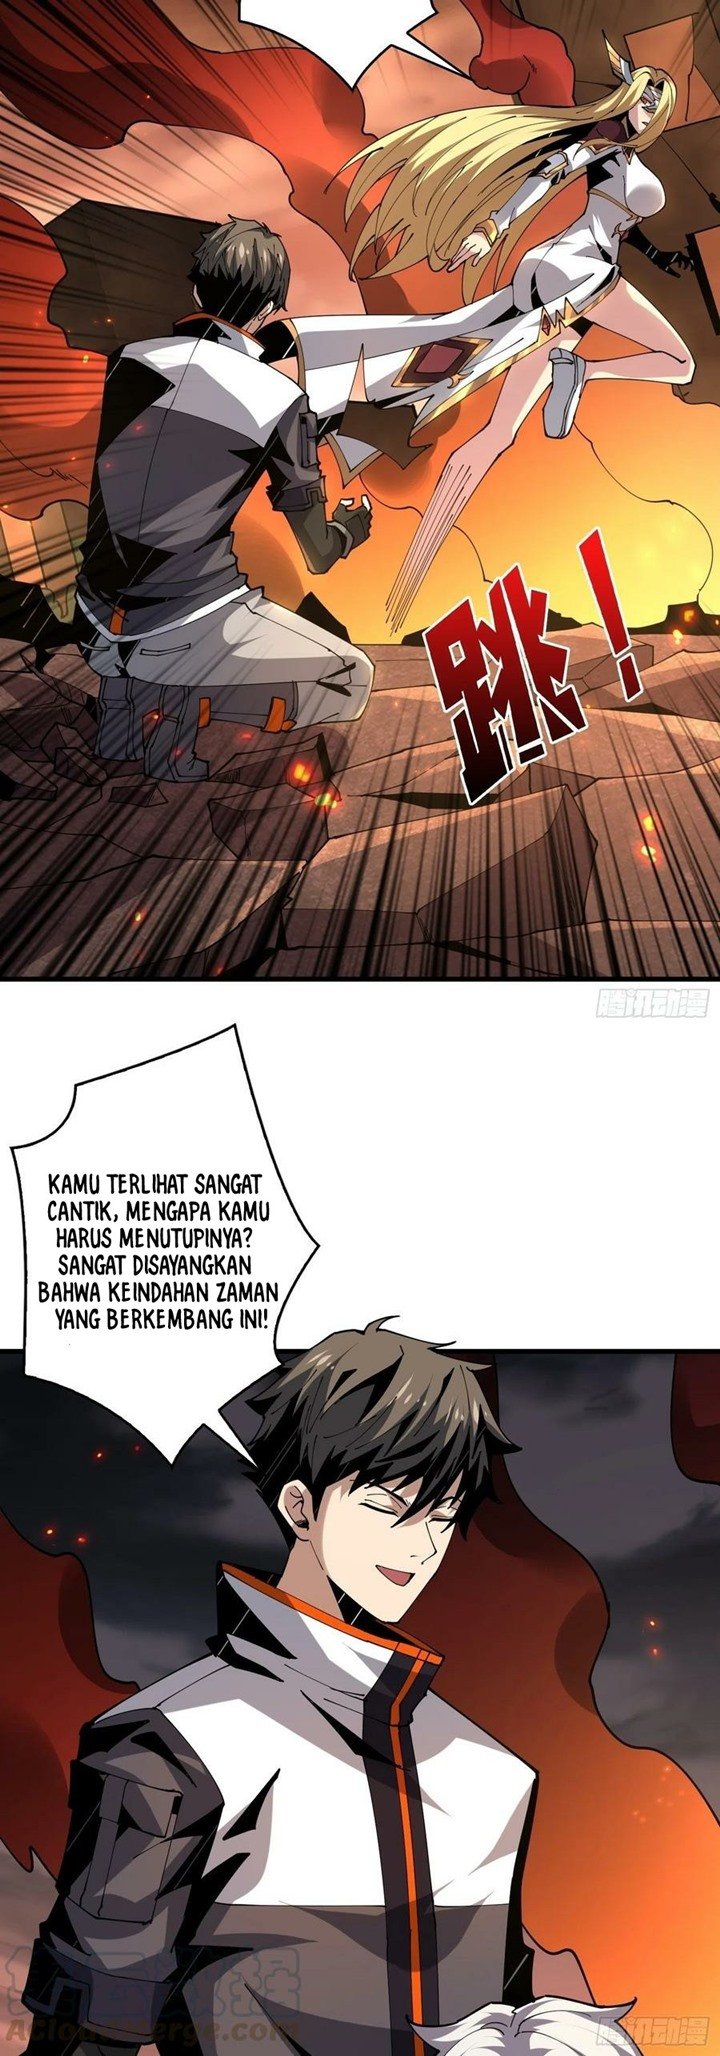 King Account At The Start Chapter 84